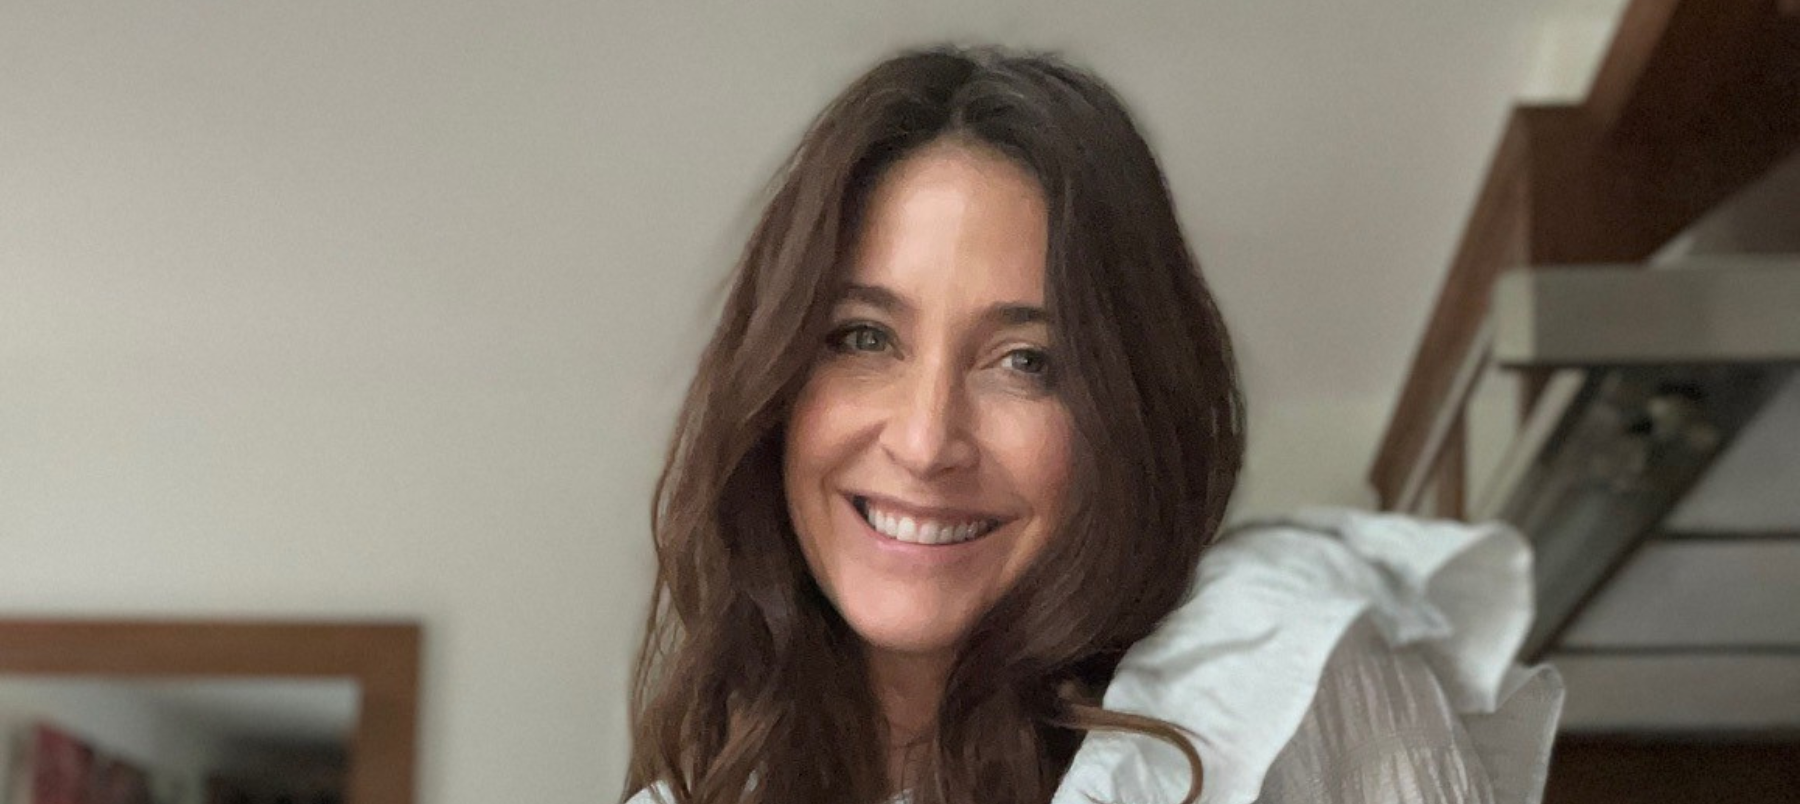 10 Questions with... Lisa Snowdon